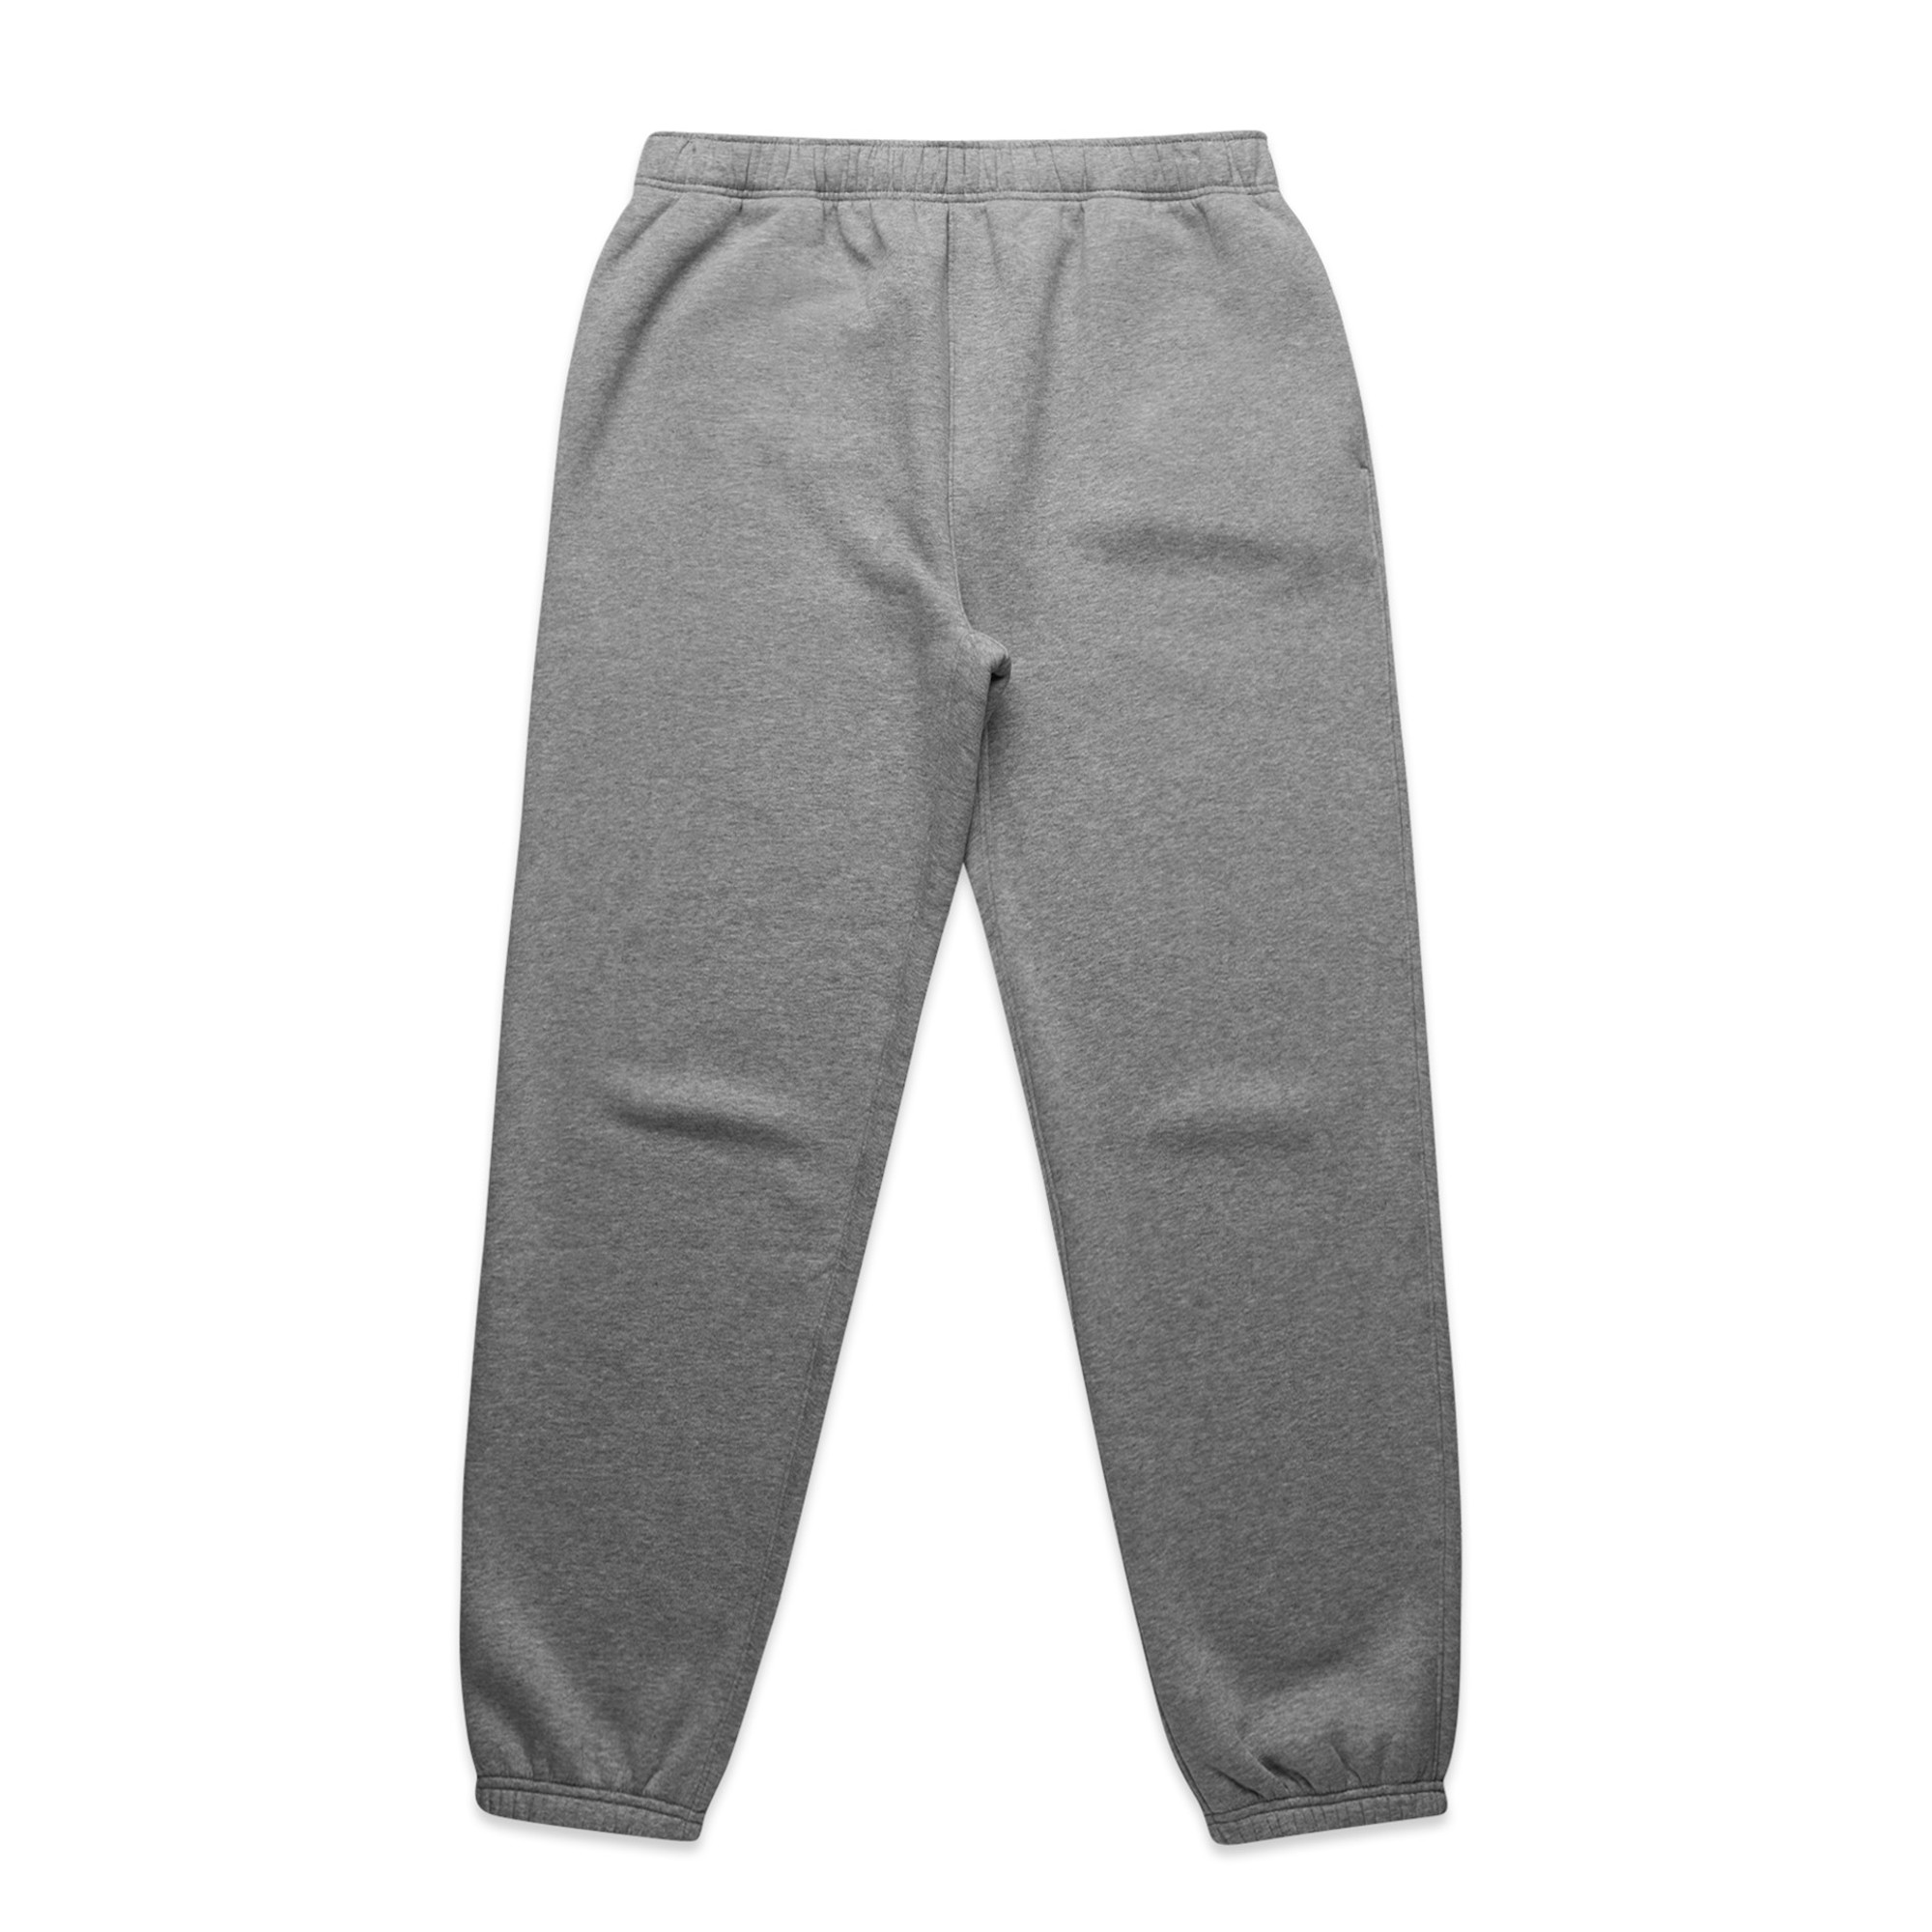 Mens Relax Track Pants - 5932 - AS Colour UK